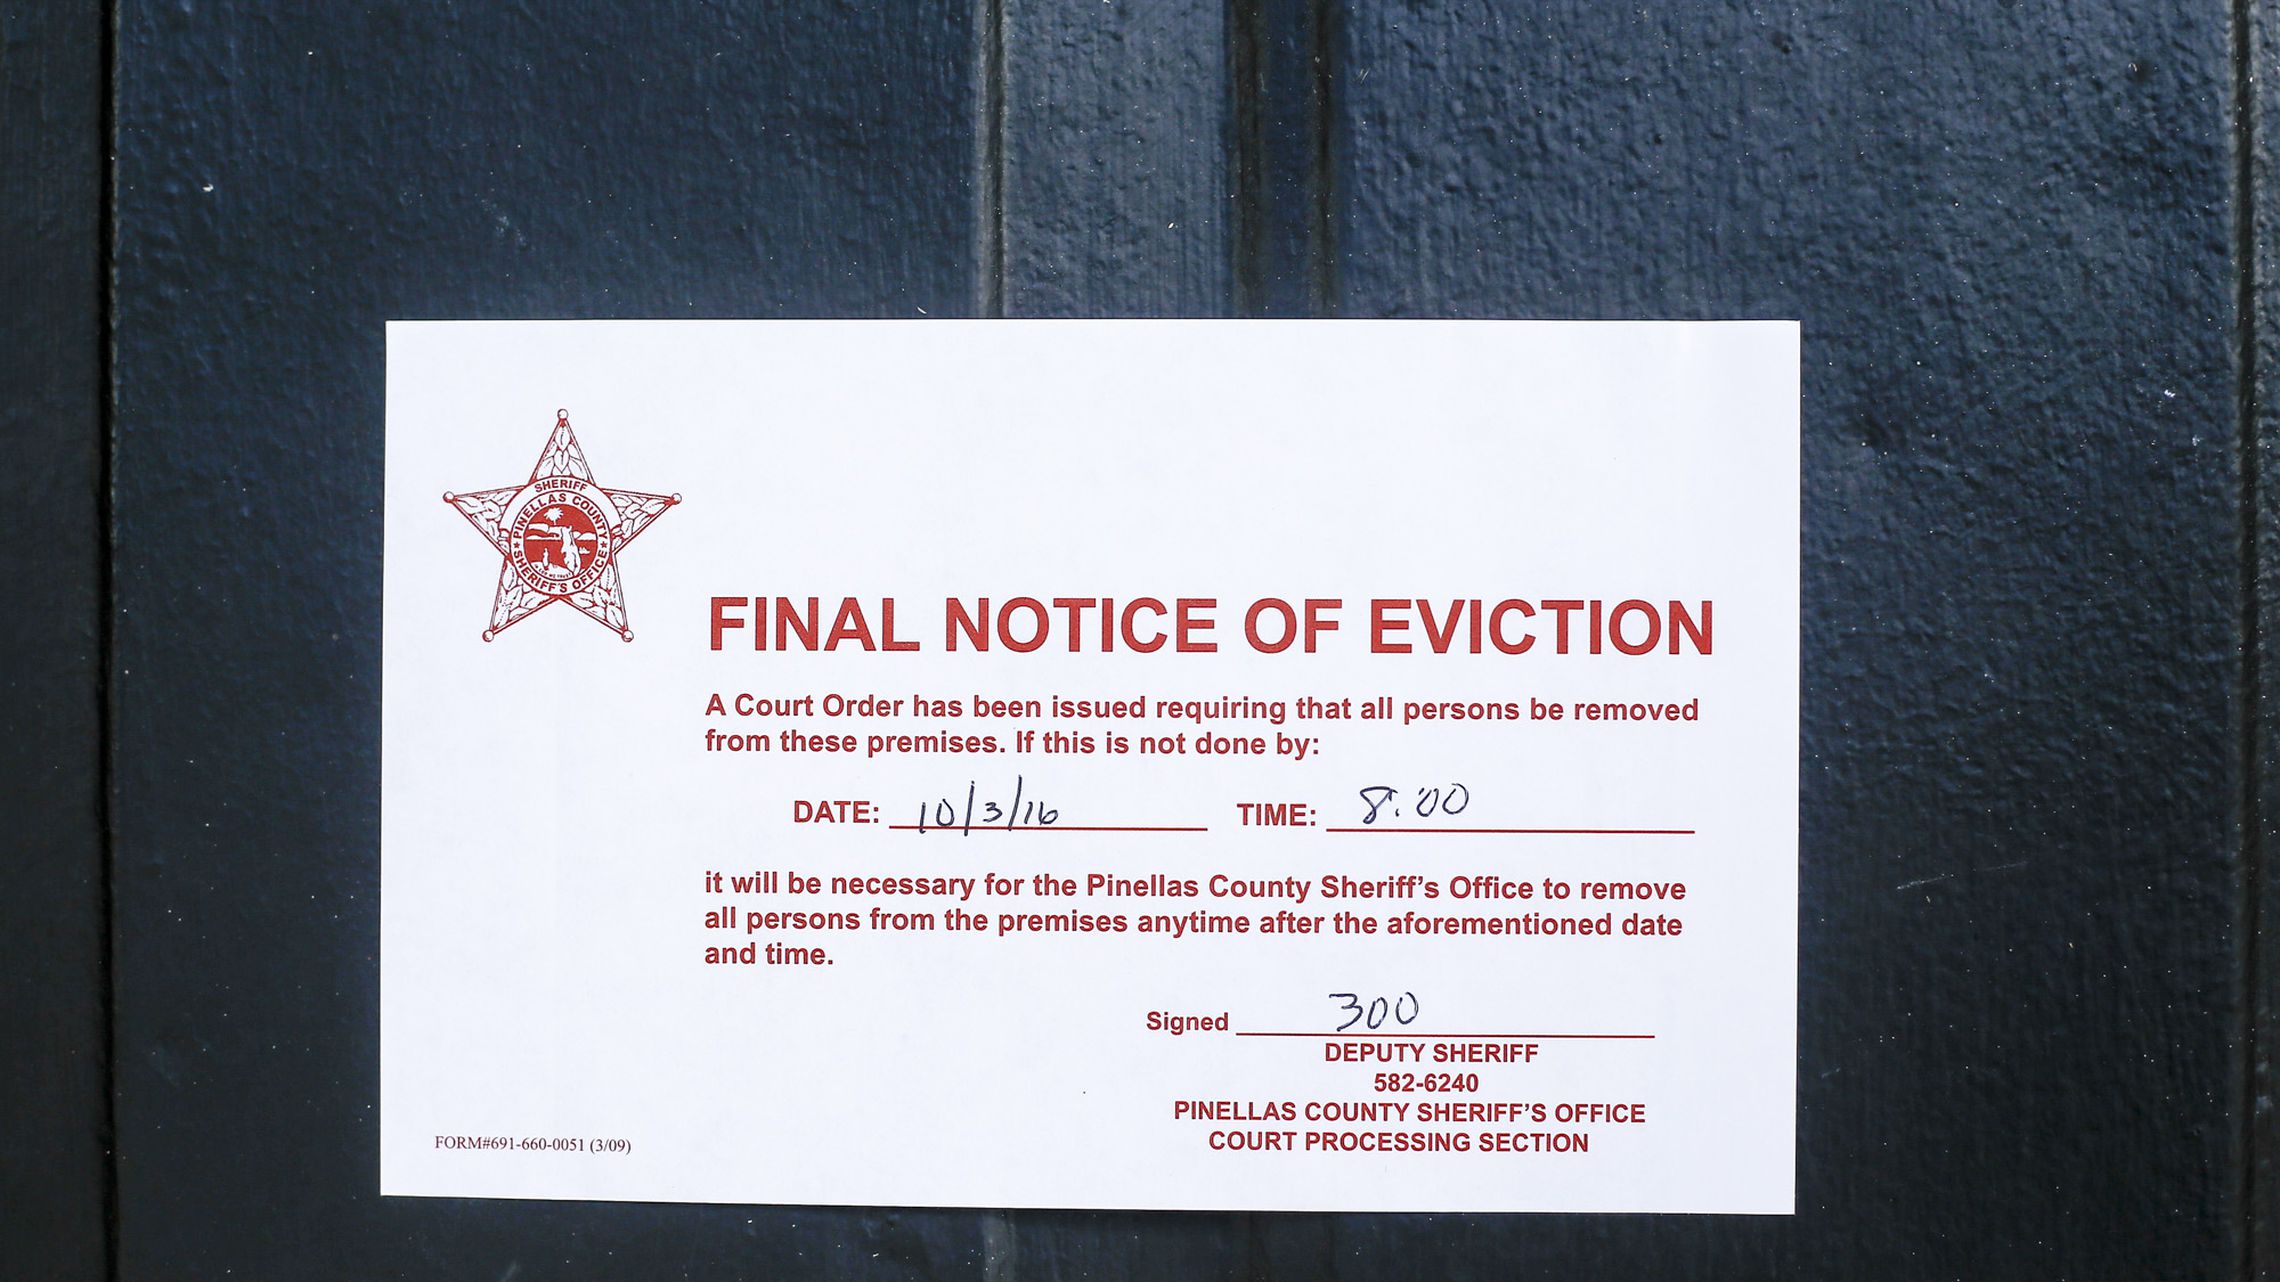 OPINION: Eviction process in Florida broken for those struggling during the pandemic